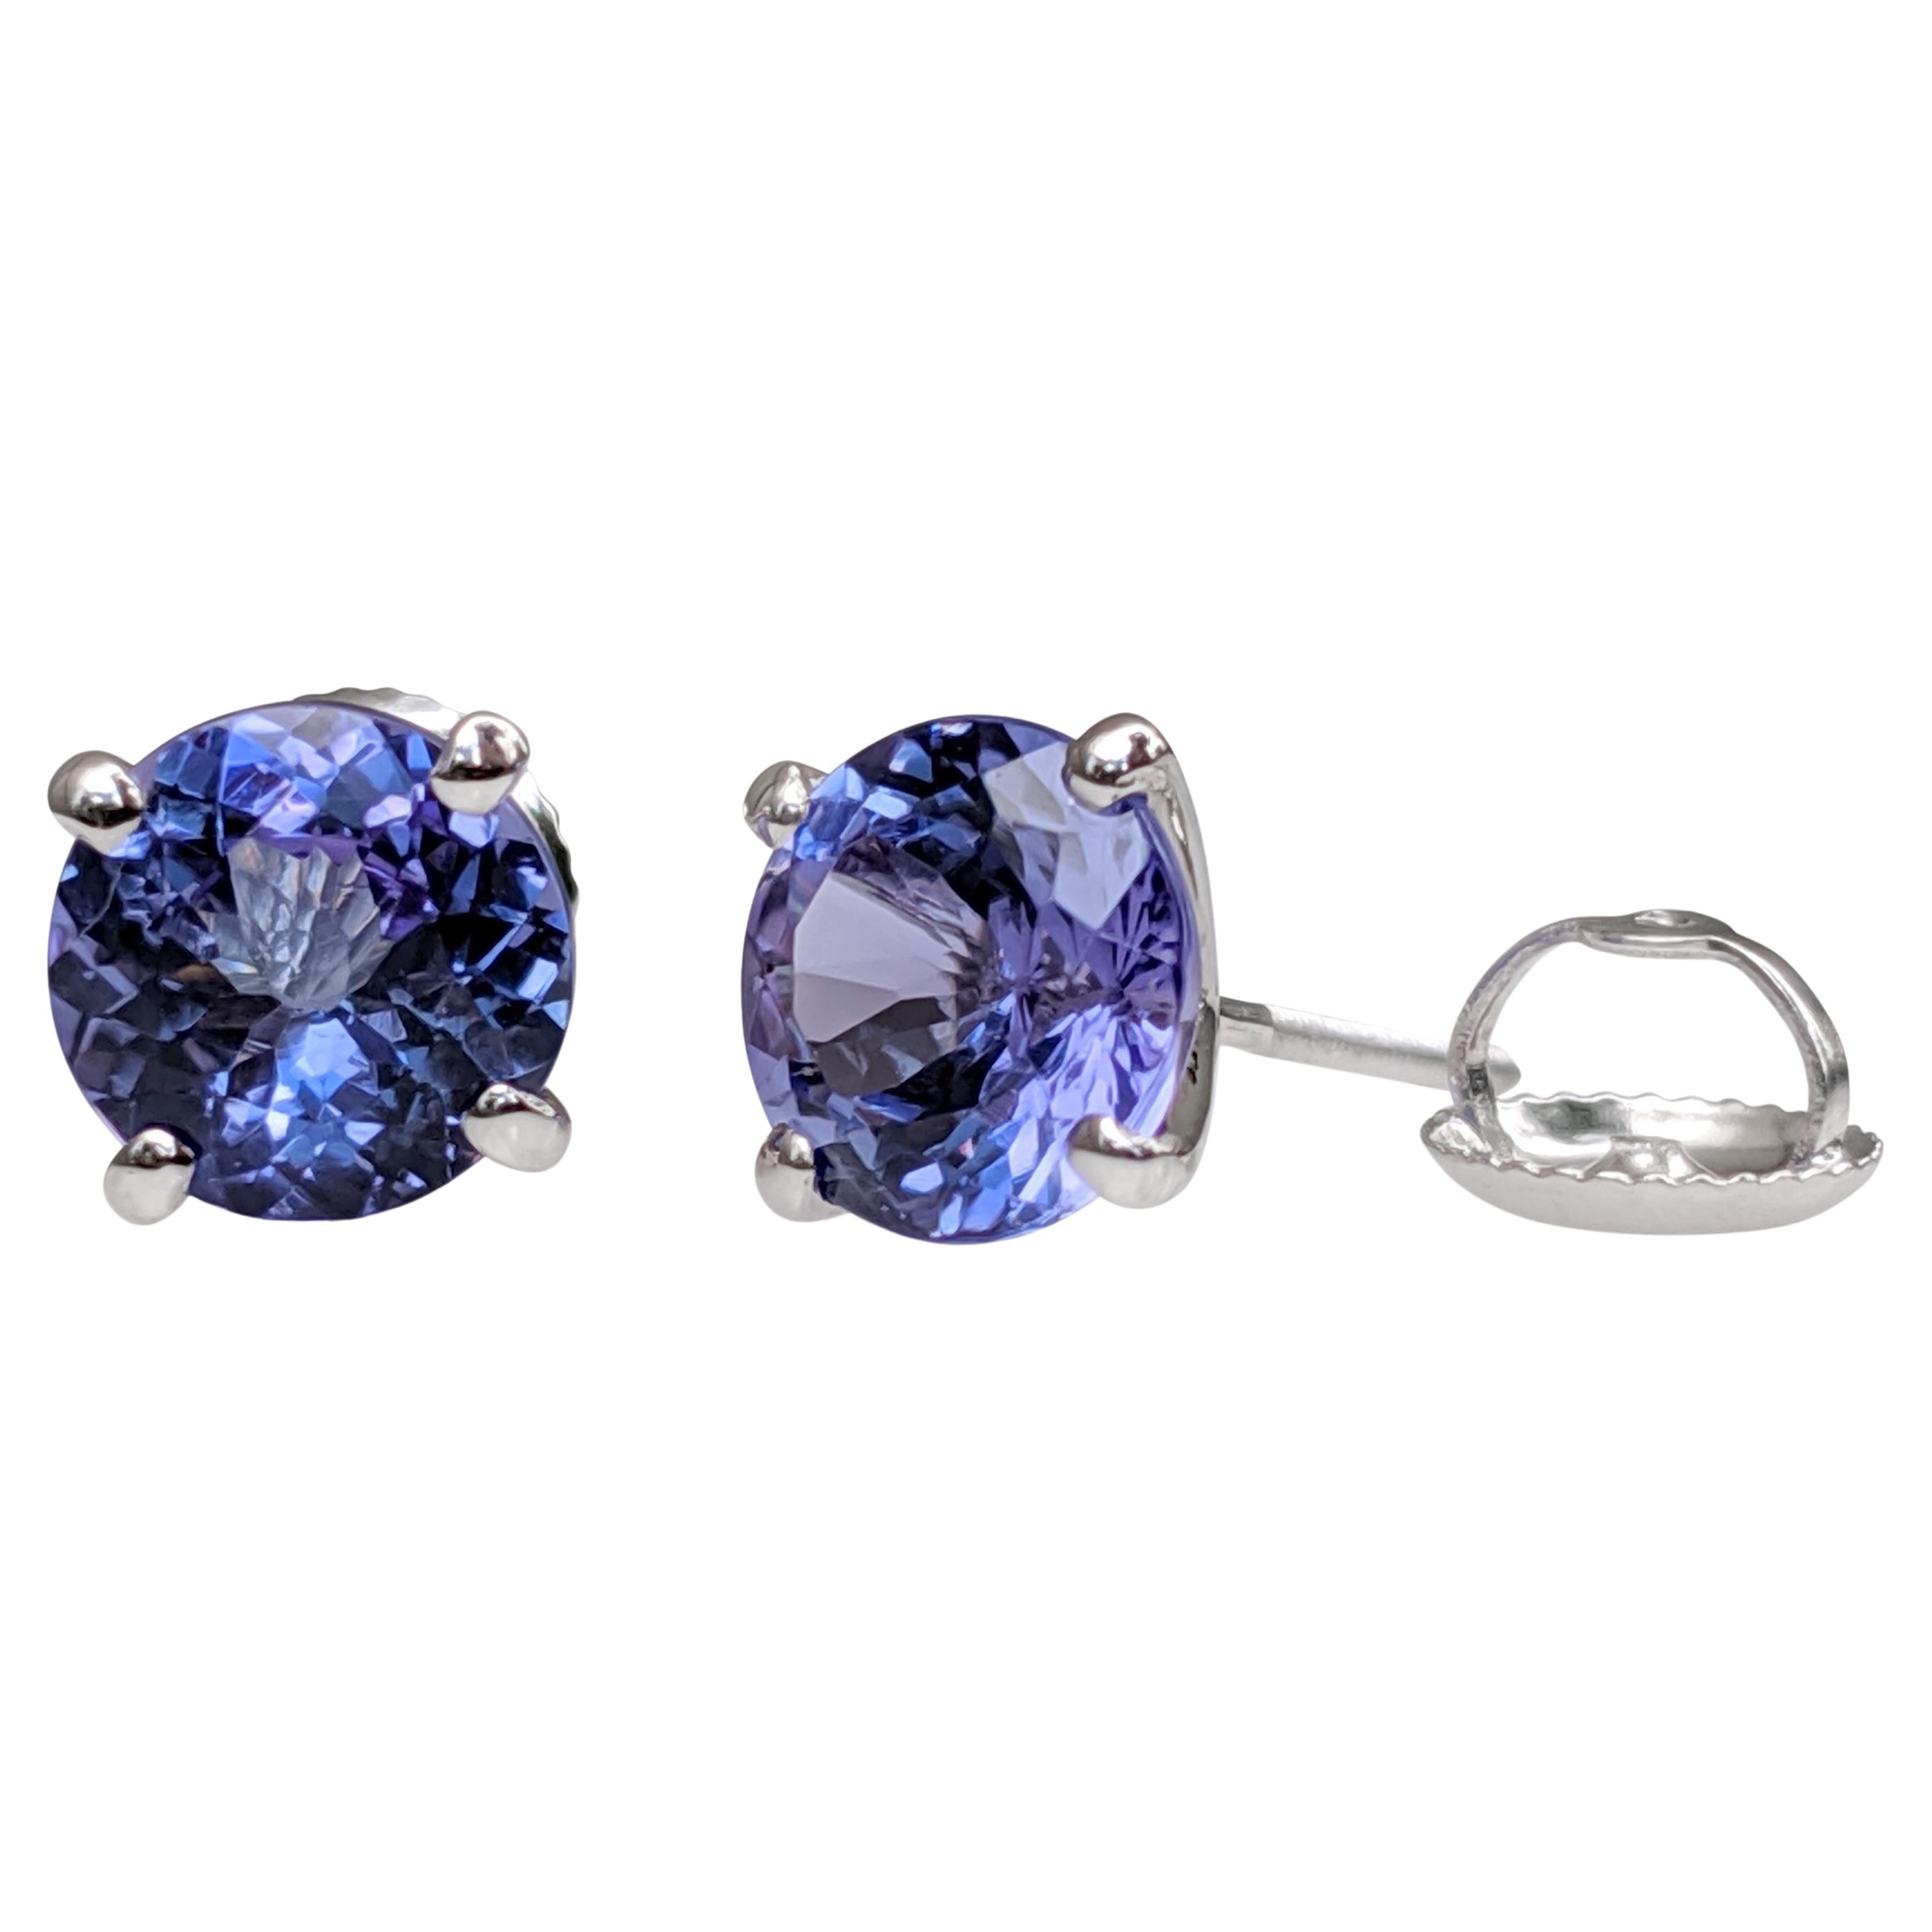 NO RESERVE! 2.79 Carat Tanzanite - 14 kt. White gold - Earrings For Sale